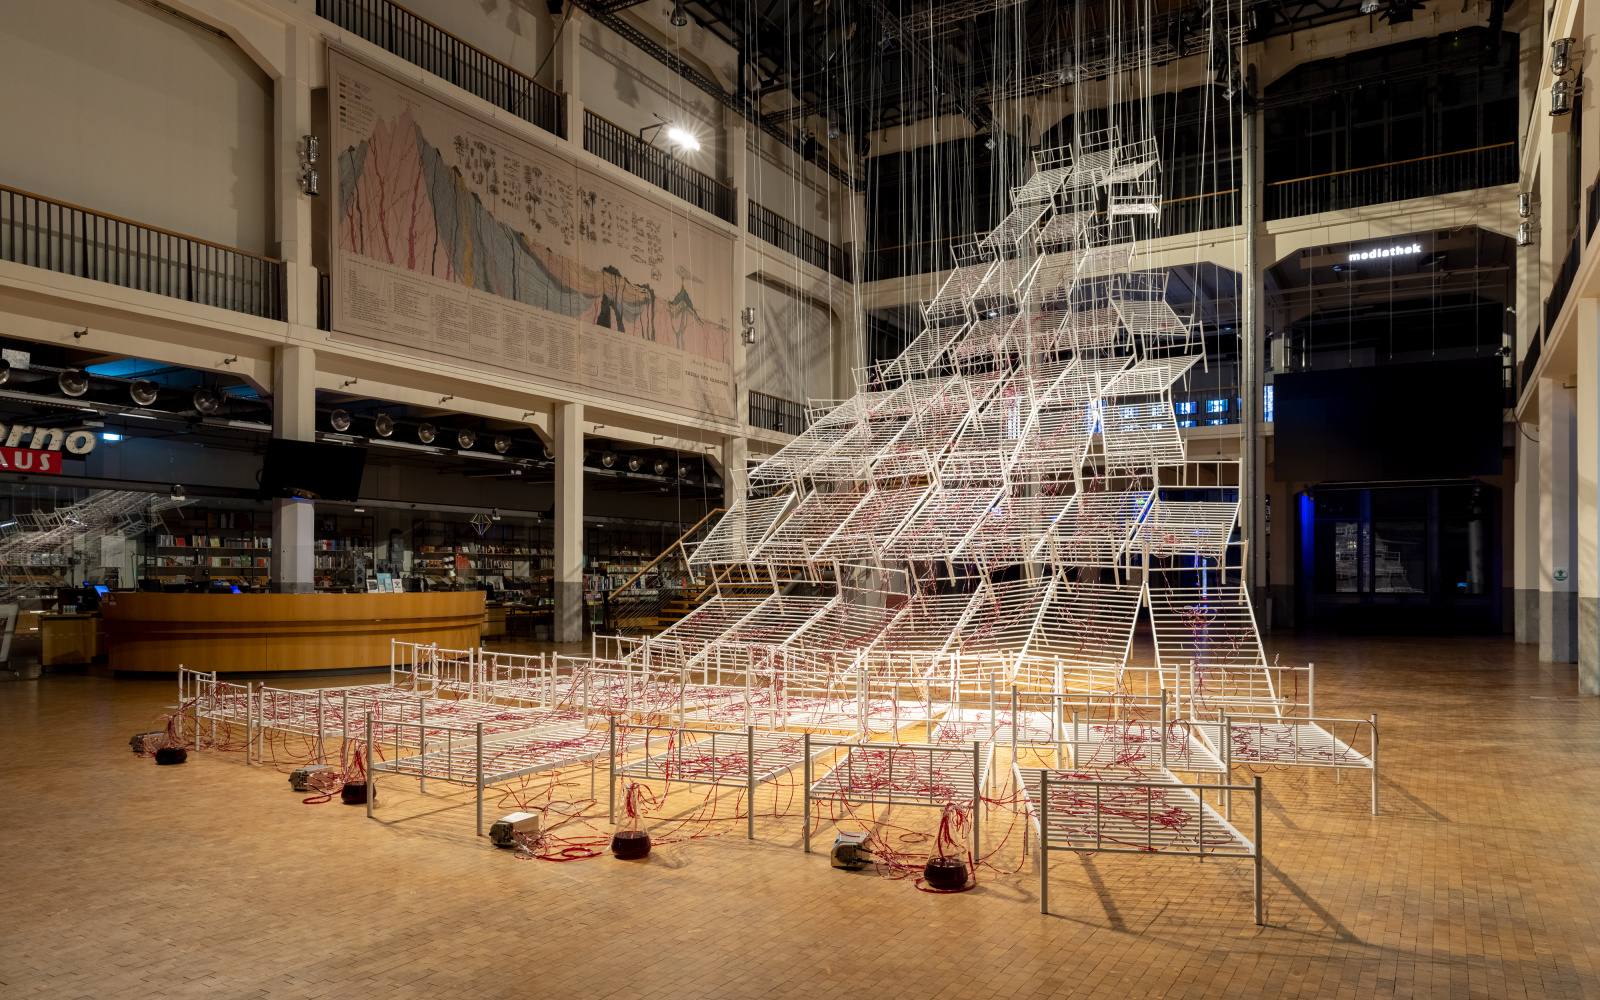 Installation view of Chiharu Shiota's »Connected to Life«. On view are several hospital bed frames hanging from the ceiling. Red liquid flows through transparent tubes on the beds.